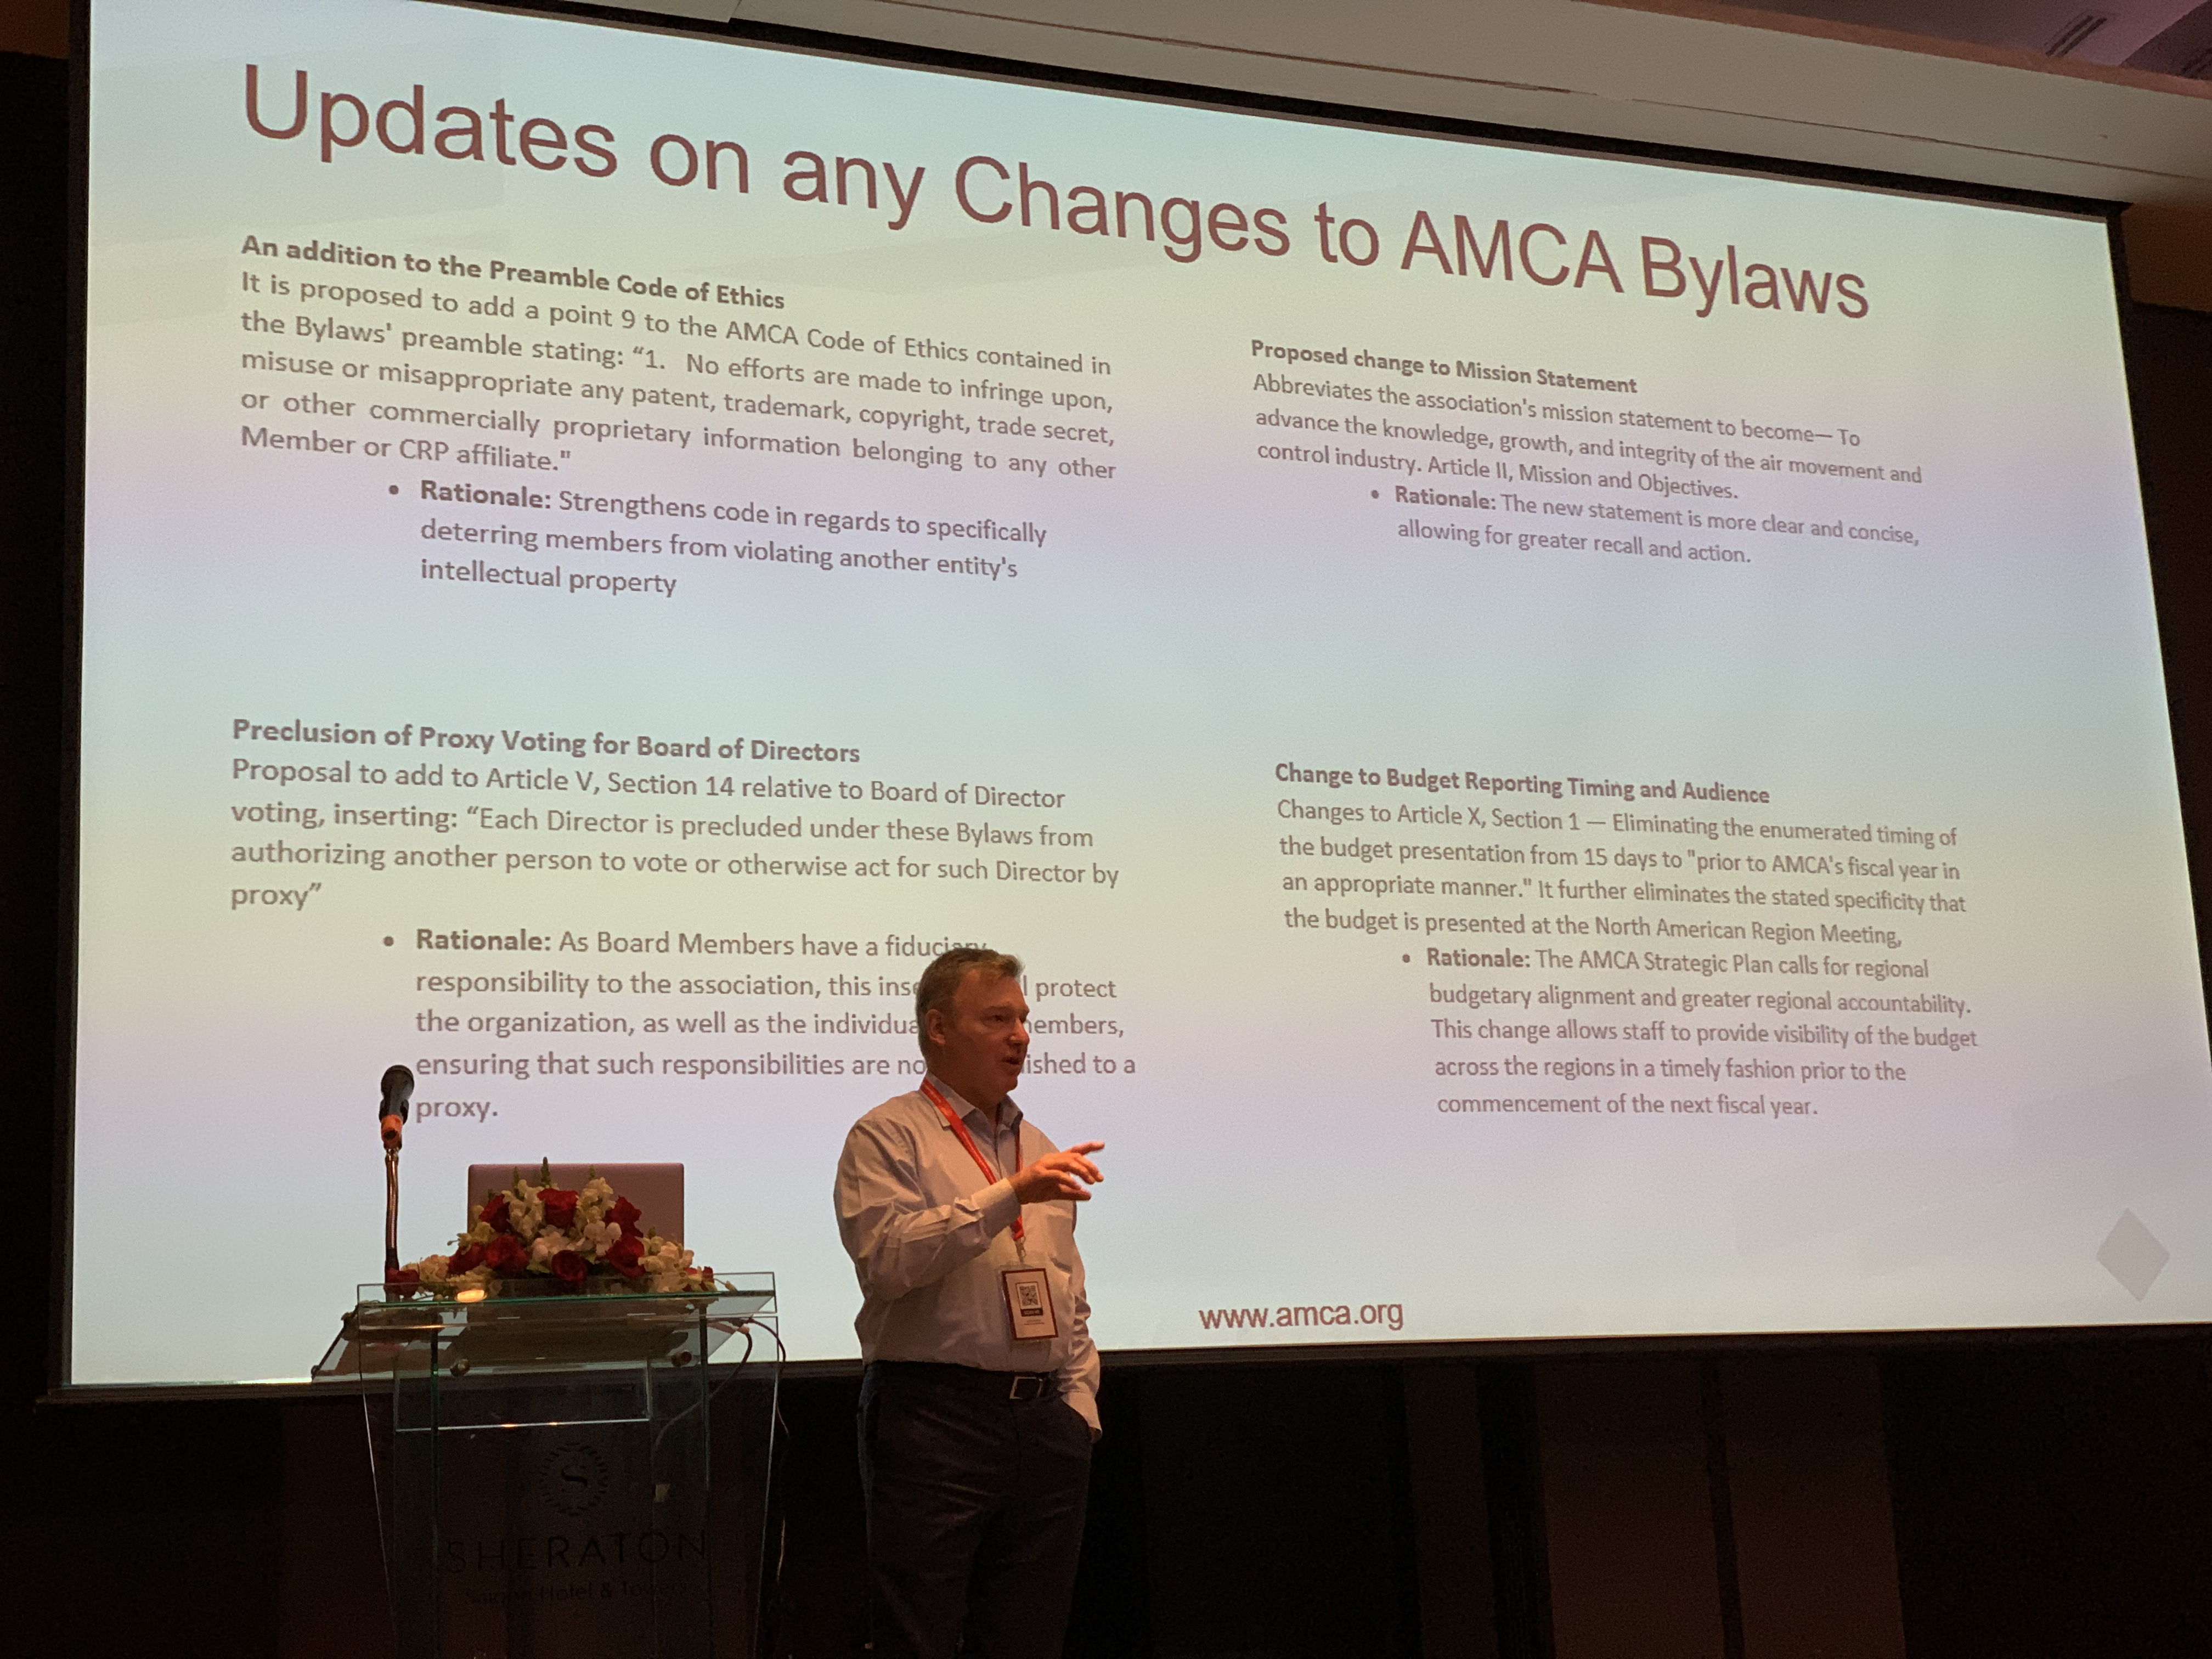 AMCA Executive Director Kevin Faltin discusses proposed changes to AMCA’s bylaws during the 2022 Asia Region Meeting in Ho Chi Minh City, Vietnam, Sept. 14.